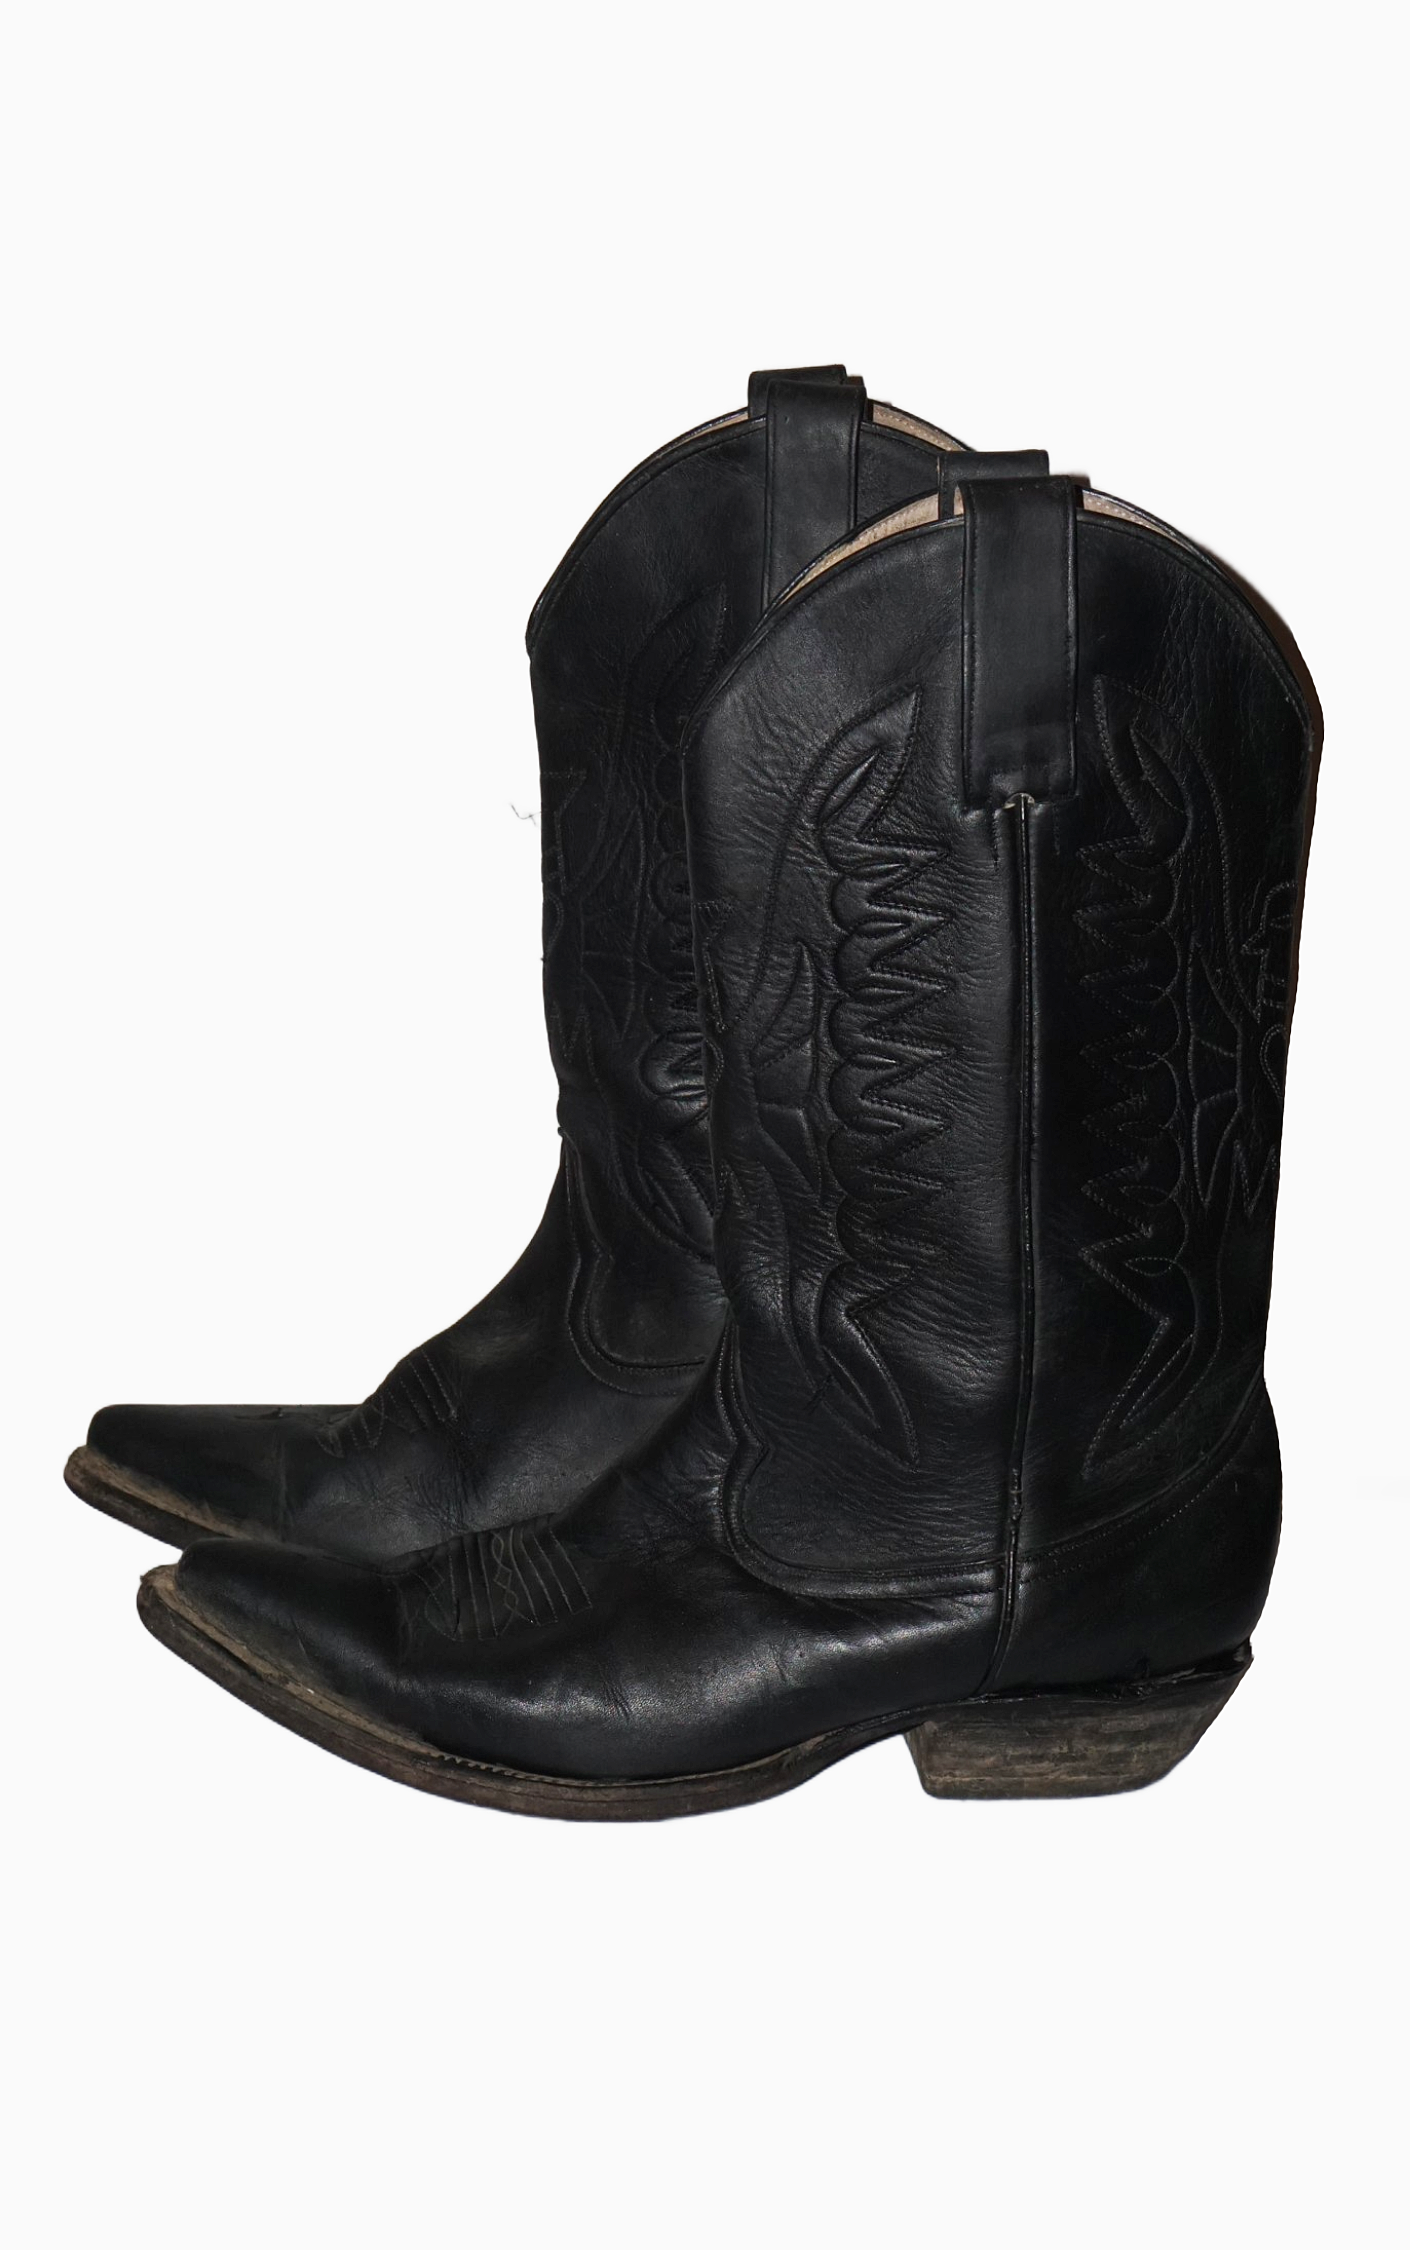 VINTAGE Black Leather Mid Calf Western Cowboy Riding Boots resellum